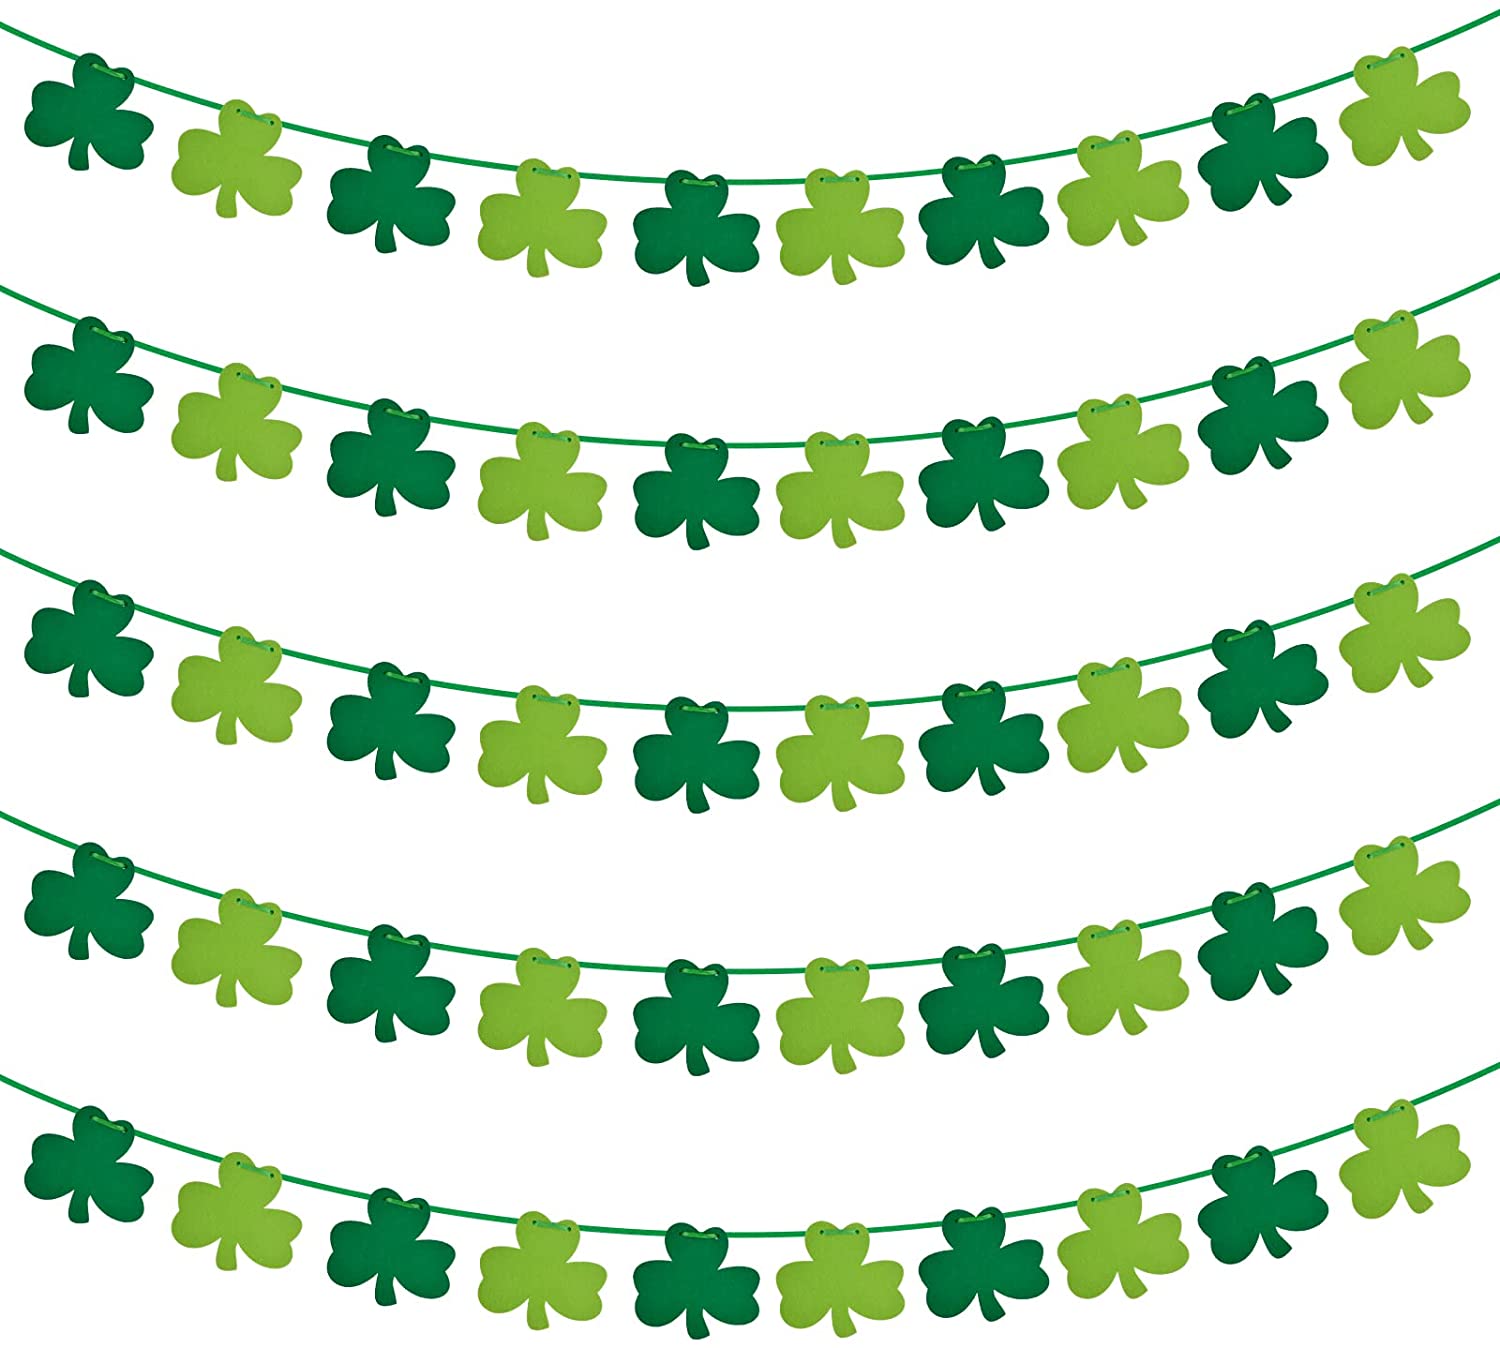 ST PATRICKS DAY GARLAND 9FT GREEN WITH GREEN CLOVERS 